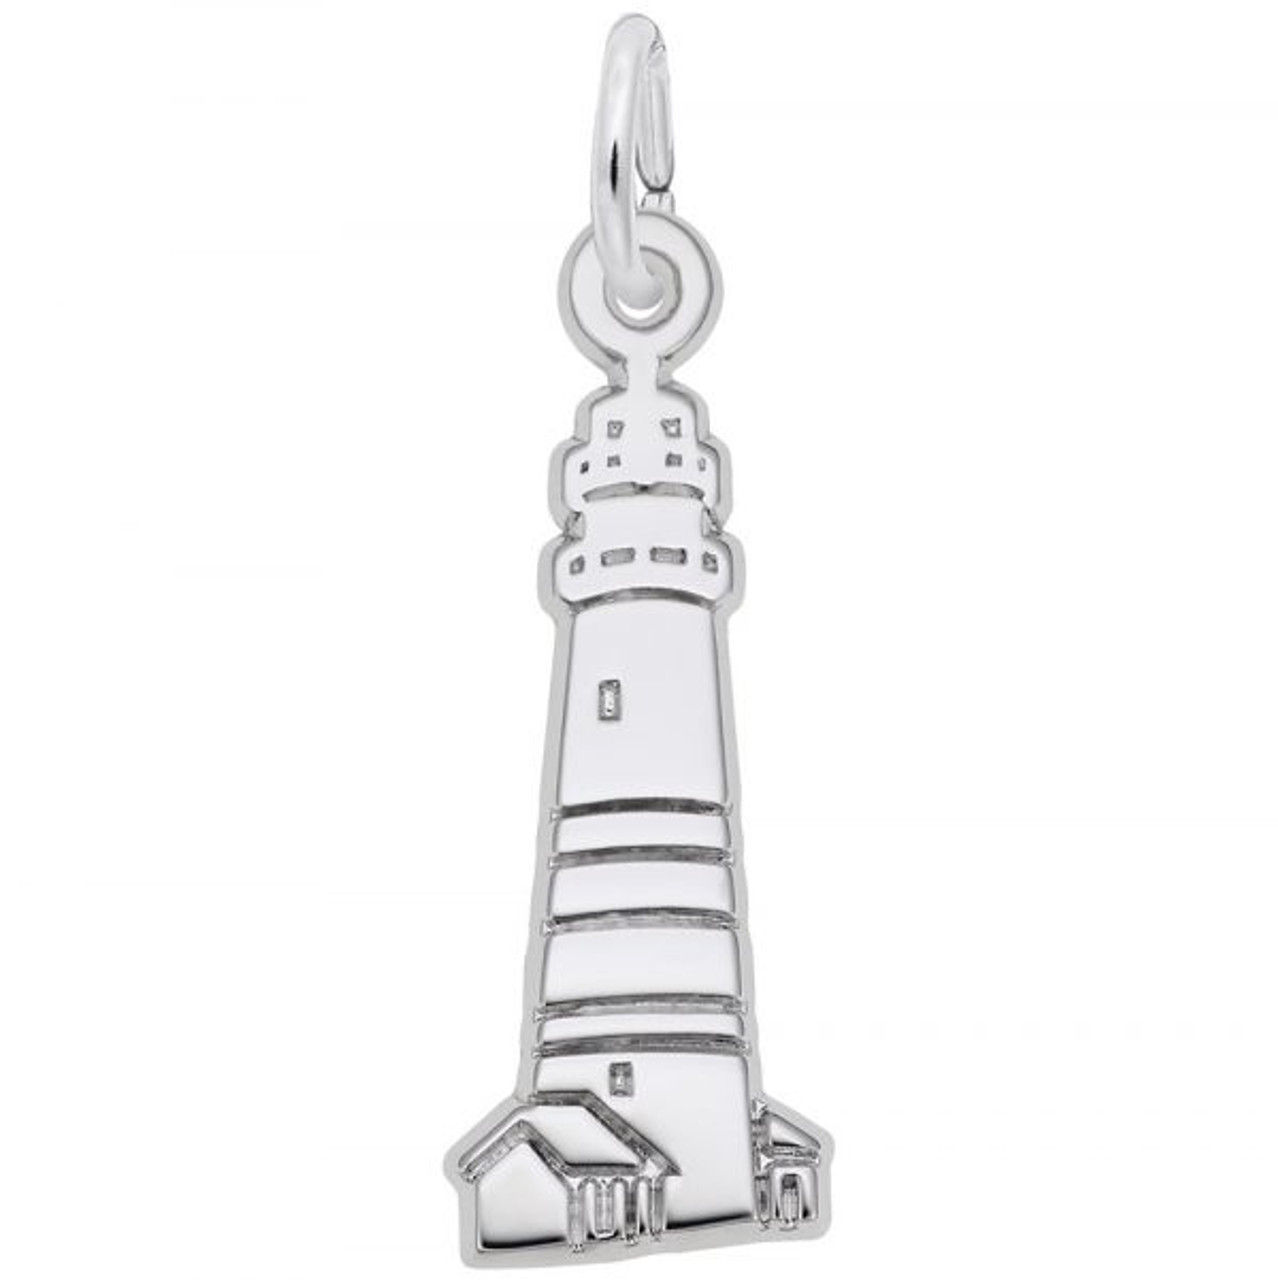 Boston Harbor Lighthouse Silver Charm - Sterling Silver and 14k White Gold